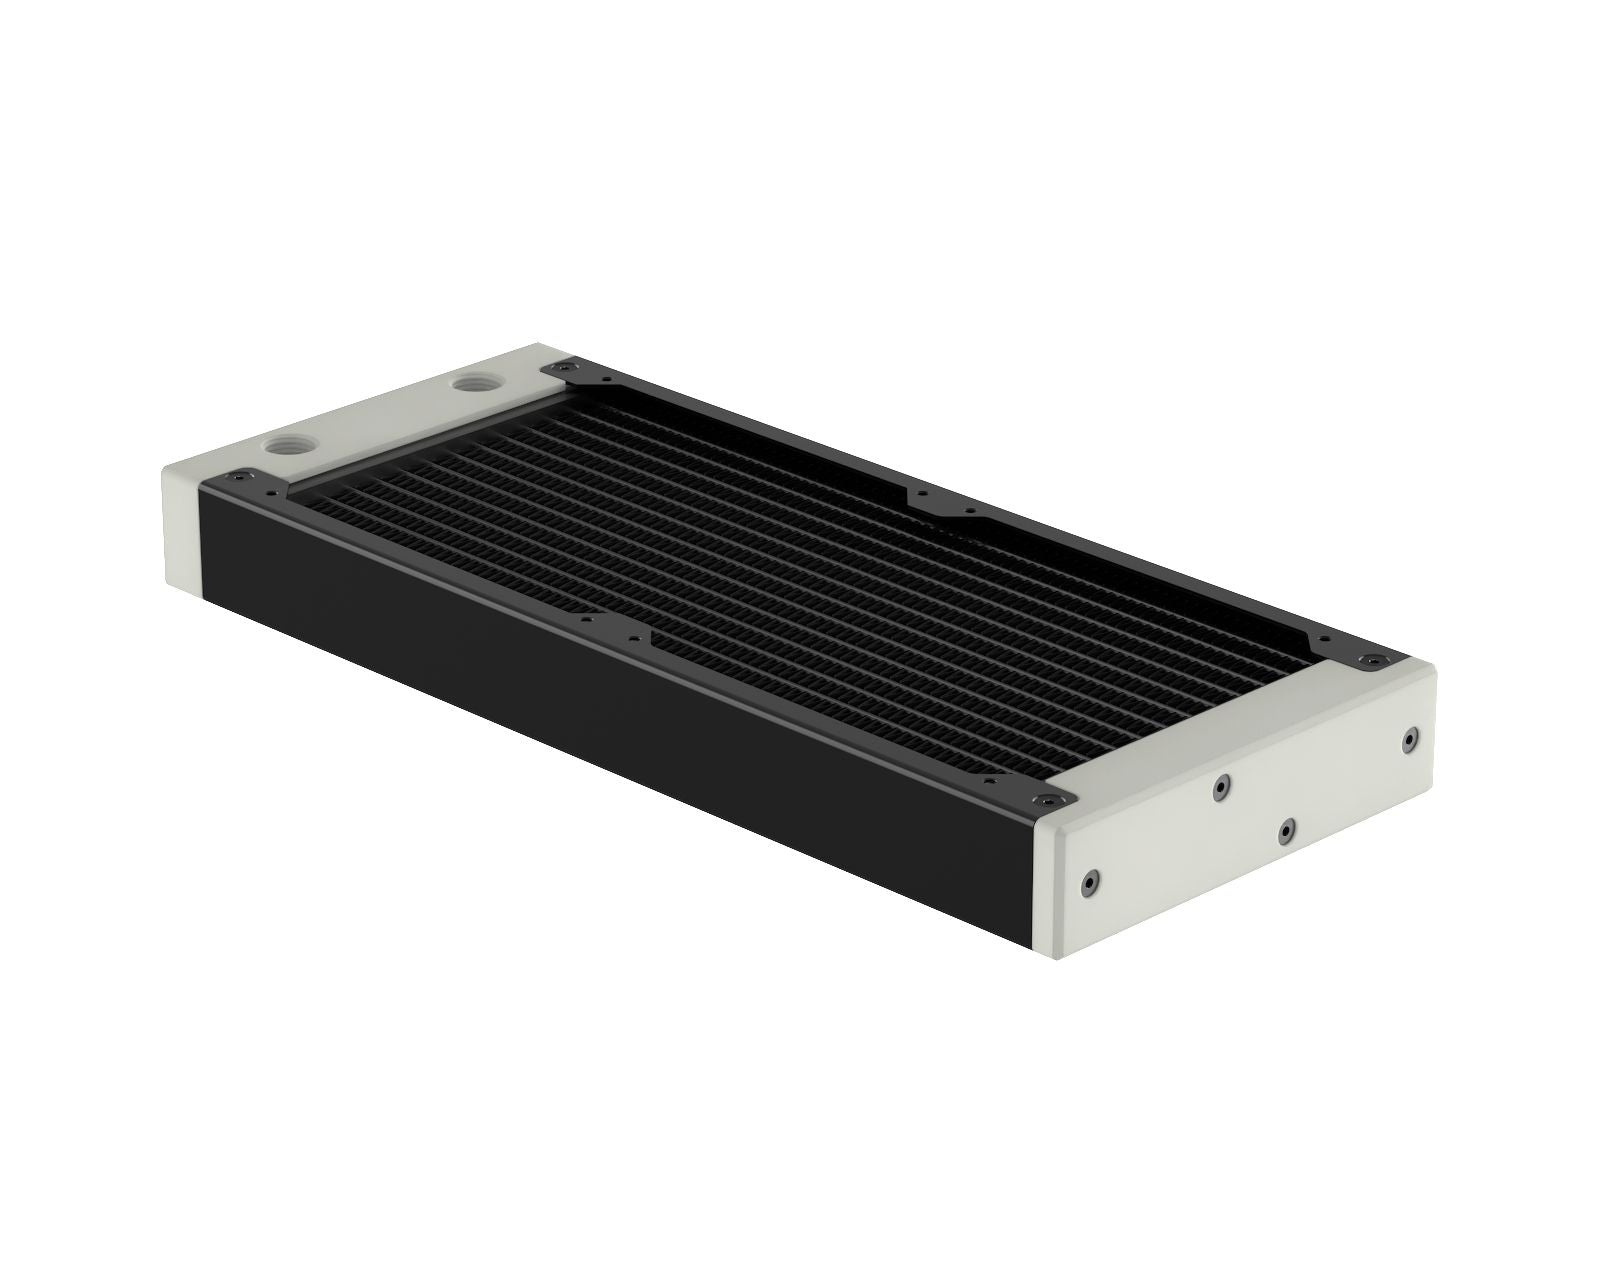 PrimoChill 240SL (30mm) EXIMO Modular Radiator, White POM, 2x120mm, Dual Fan (R-SL-W24) Available in 20+ Colors, Assembled in USA and Custom Watercooling Loop Ready - Satin Black